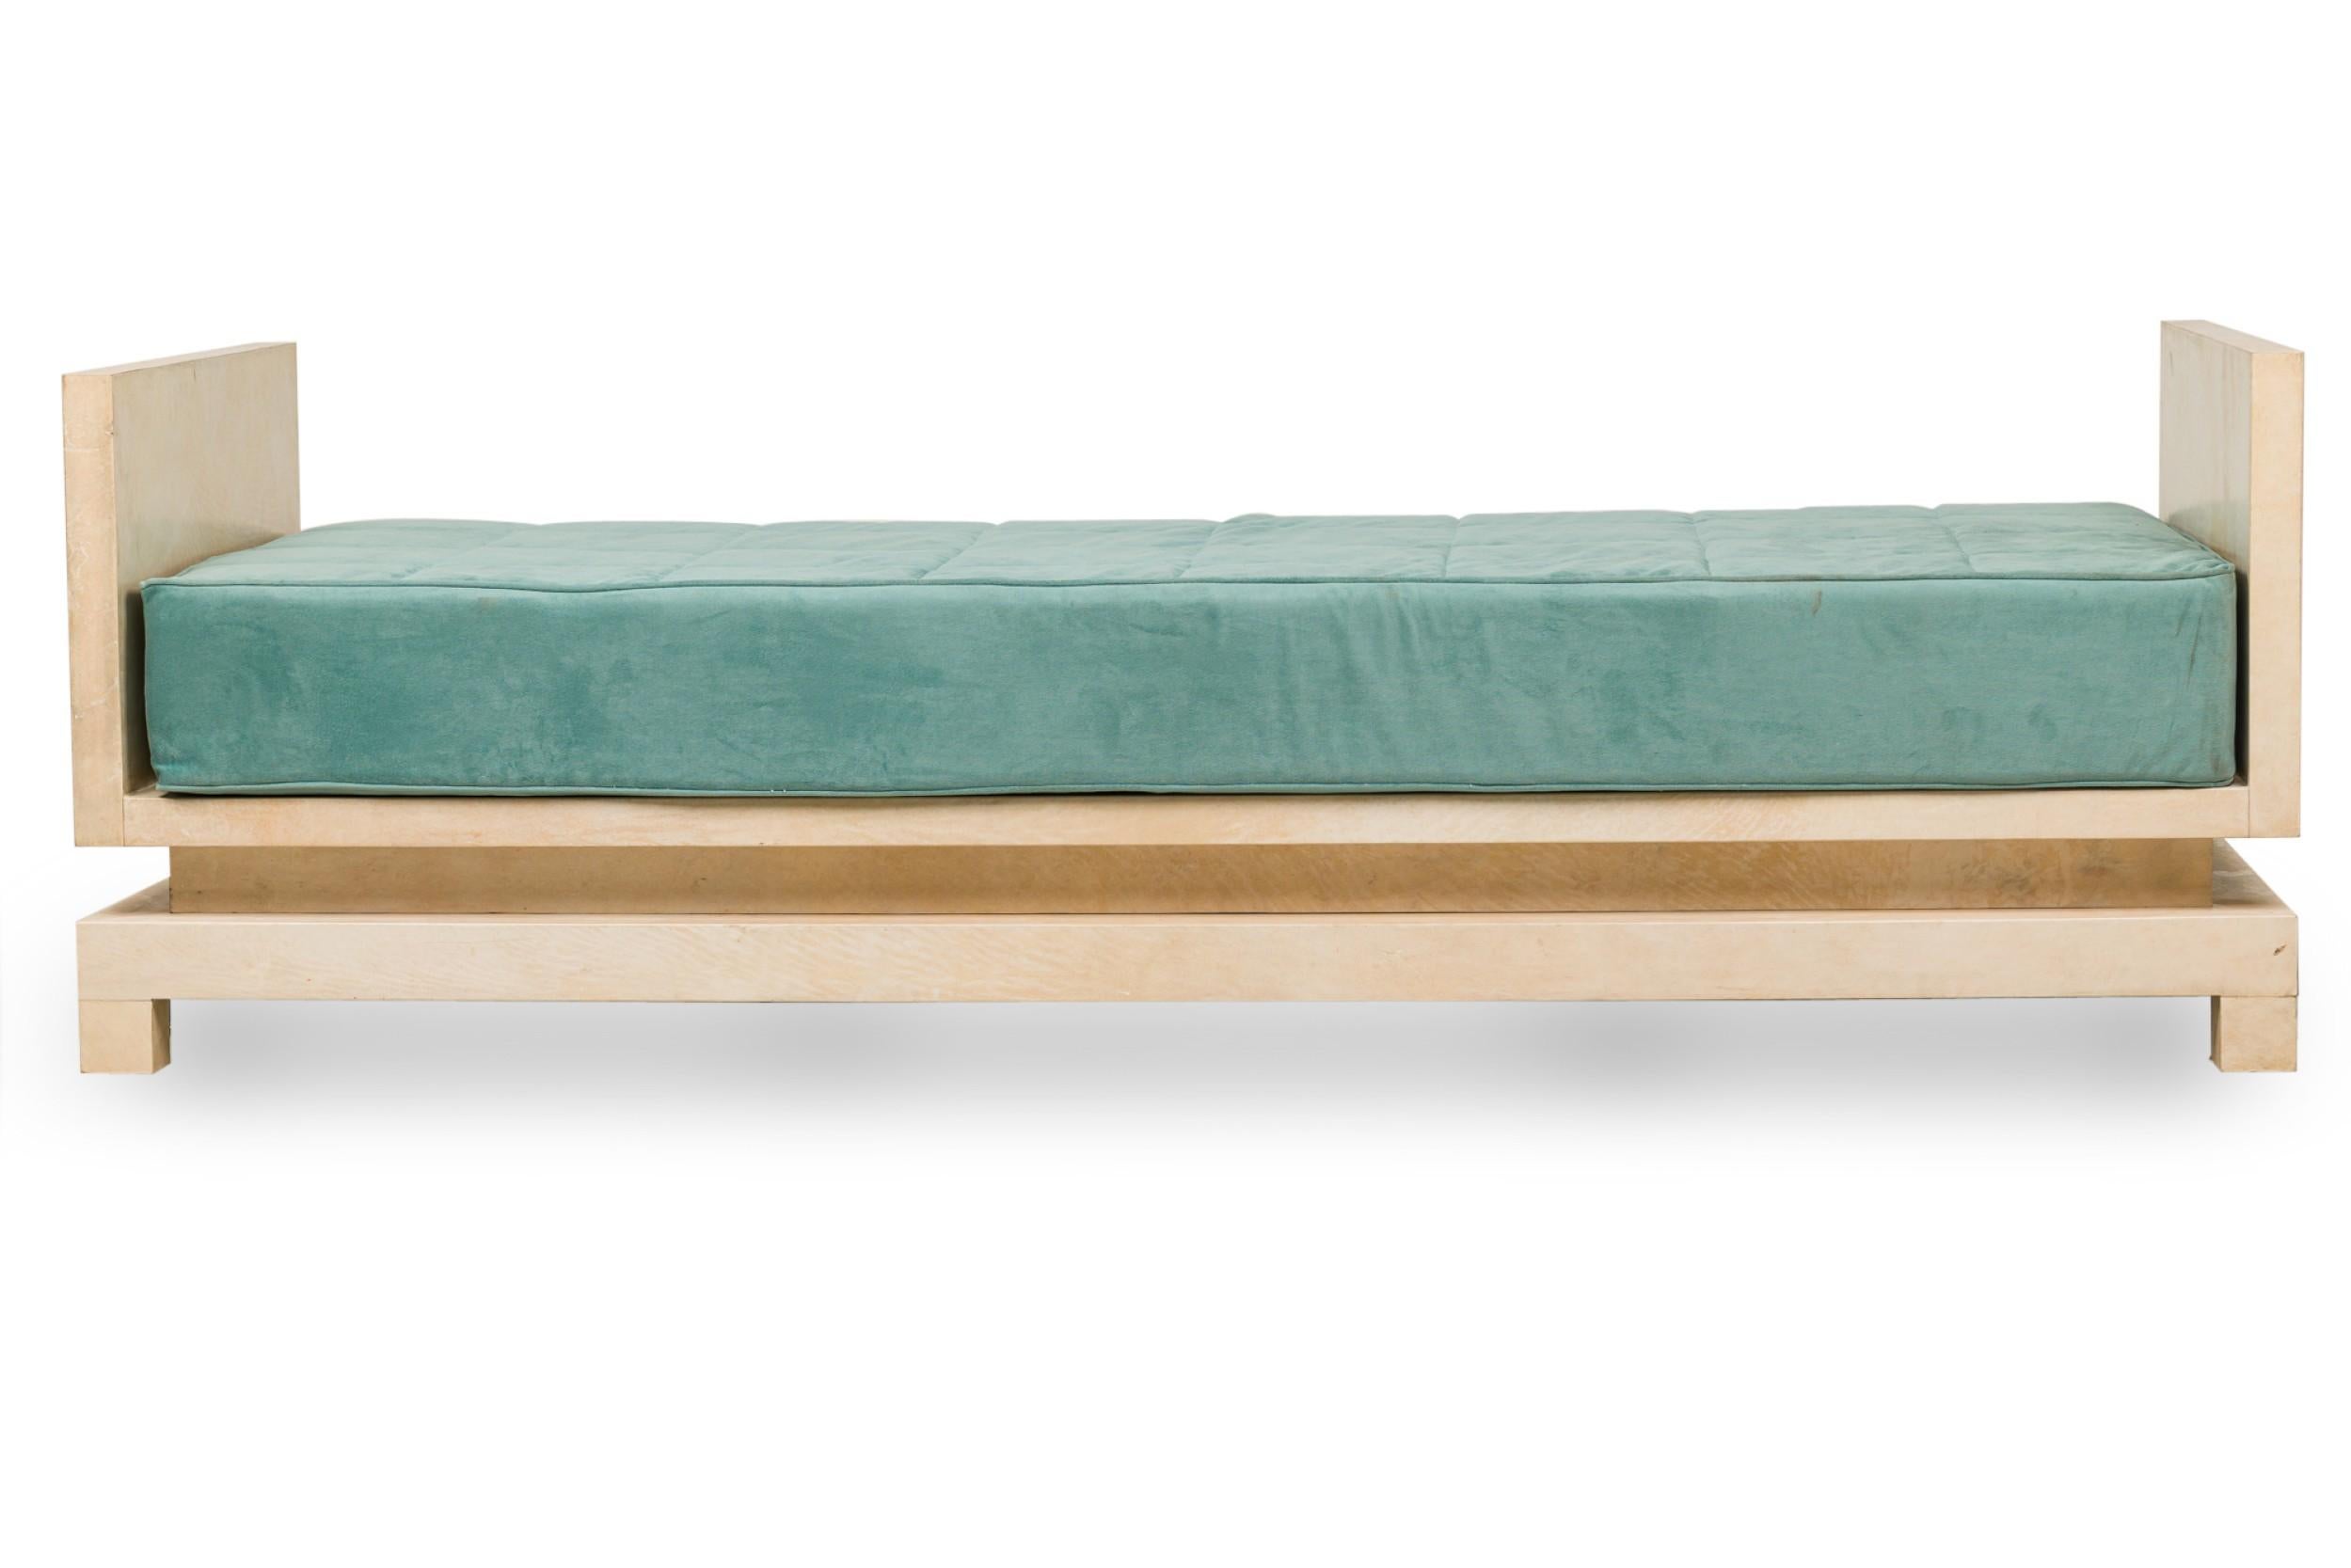 Mid-Century Modern Midcentury Parchment and Teal Upholstered Daybed, Manner of Samuel Marx For Sale